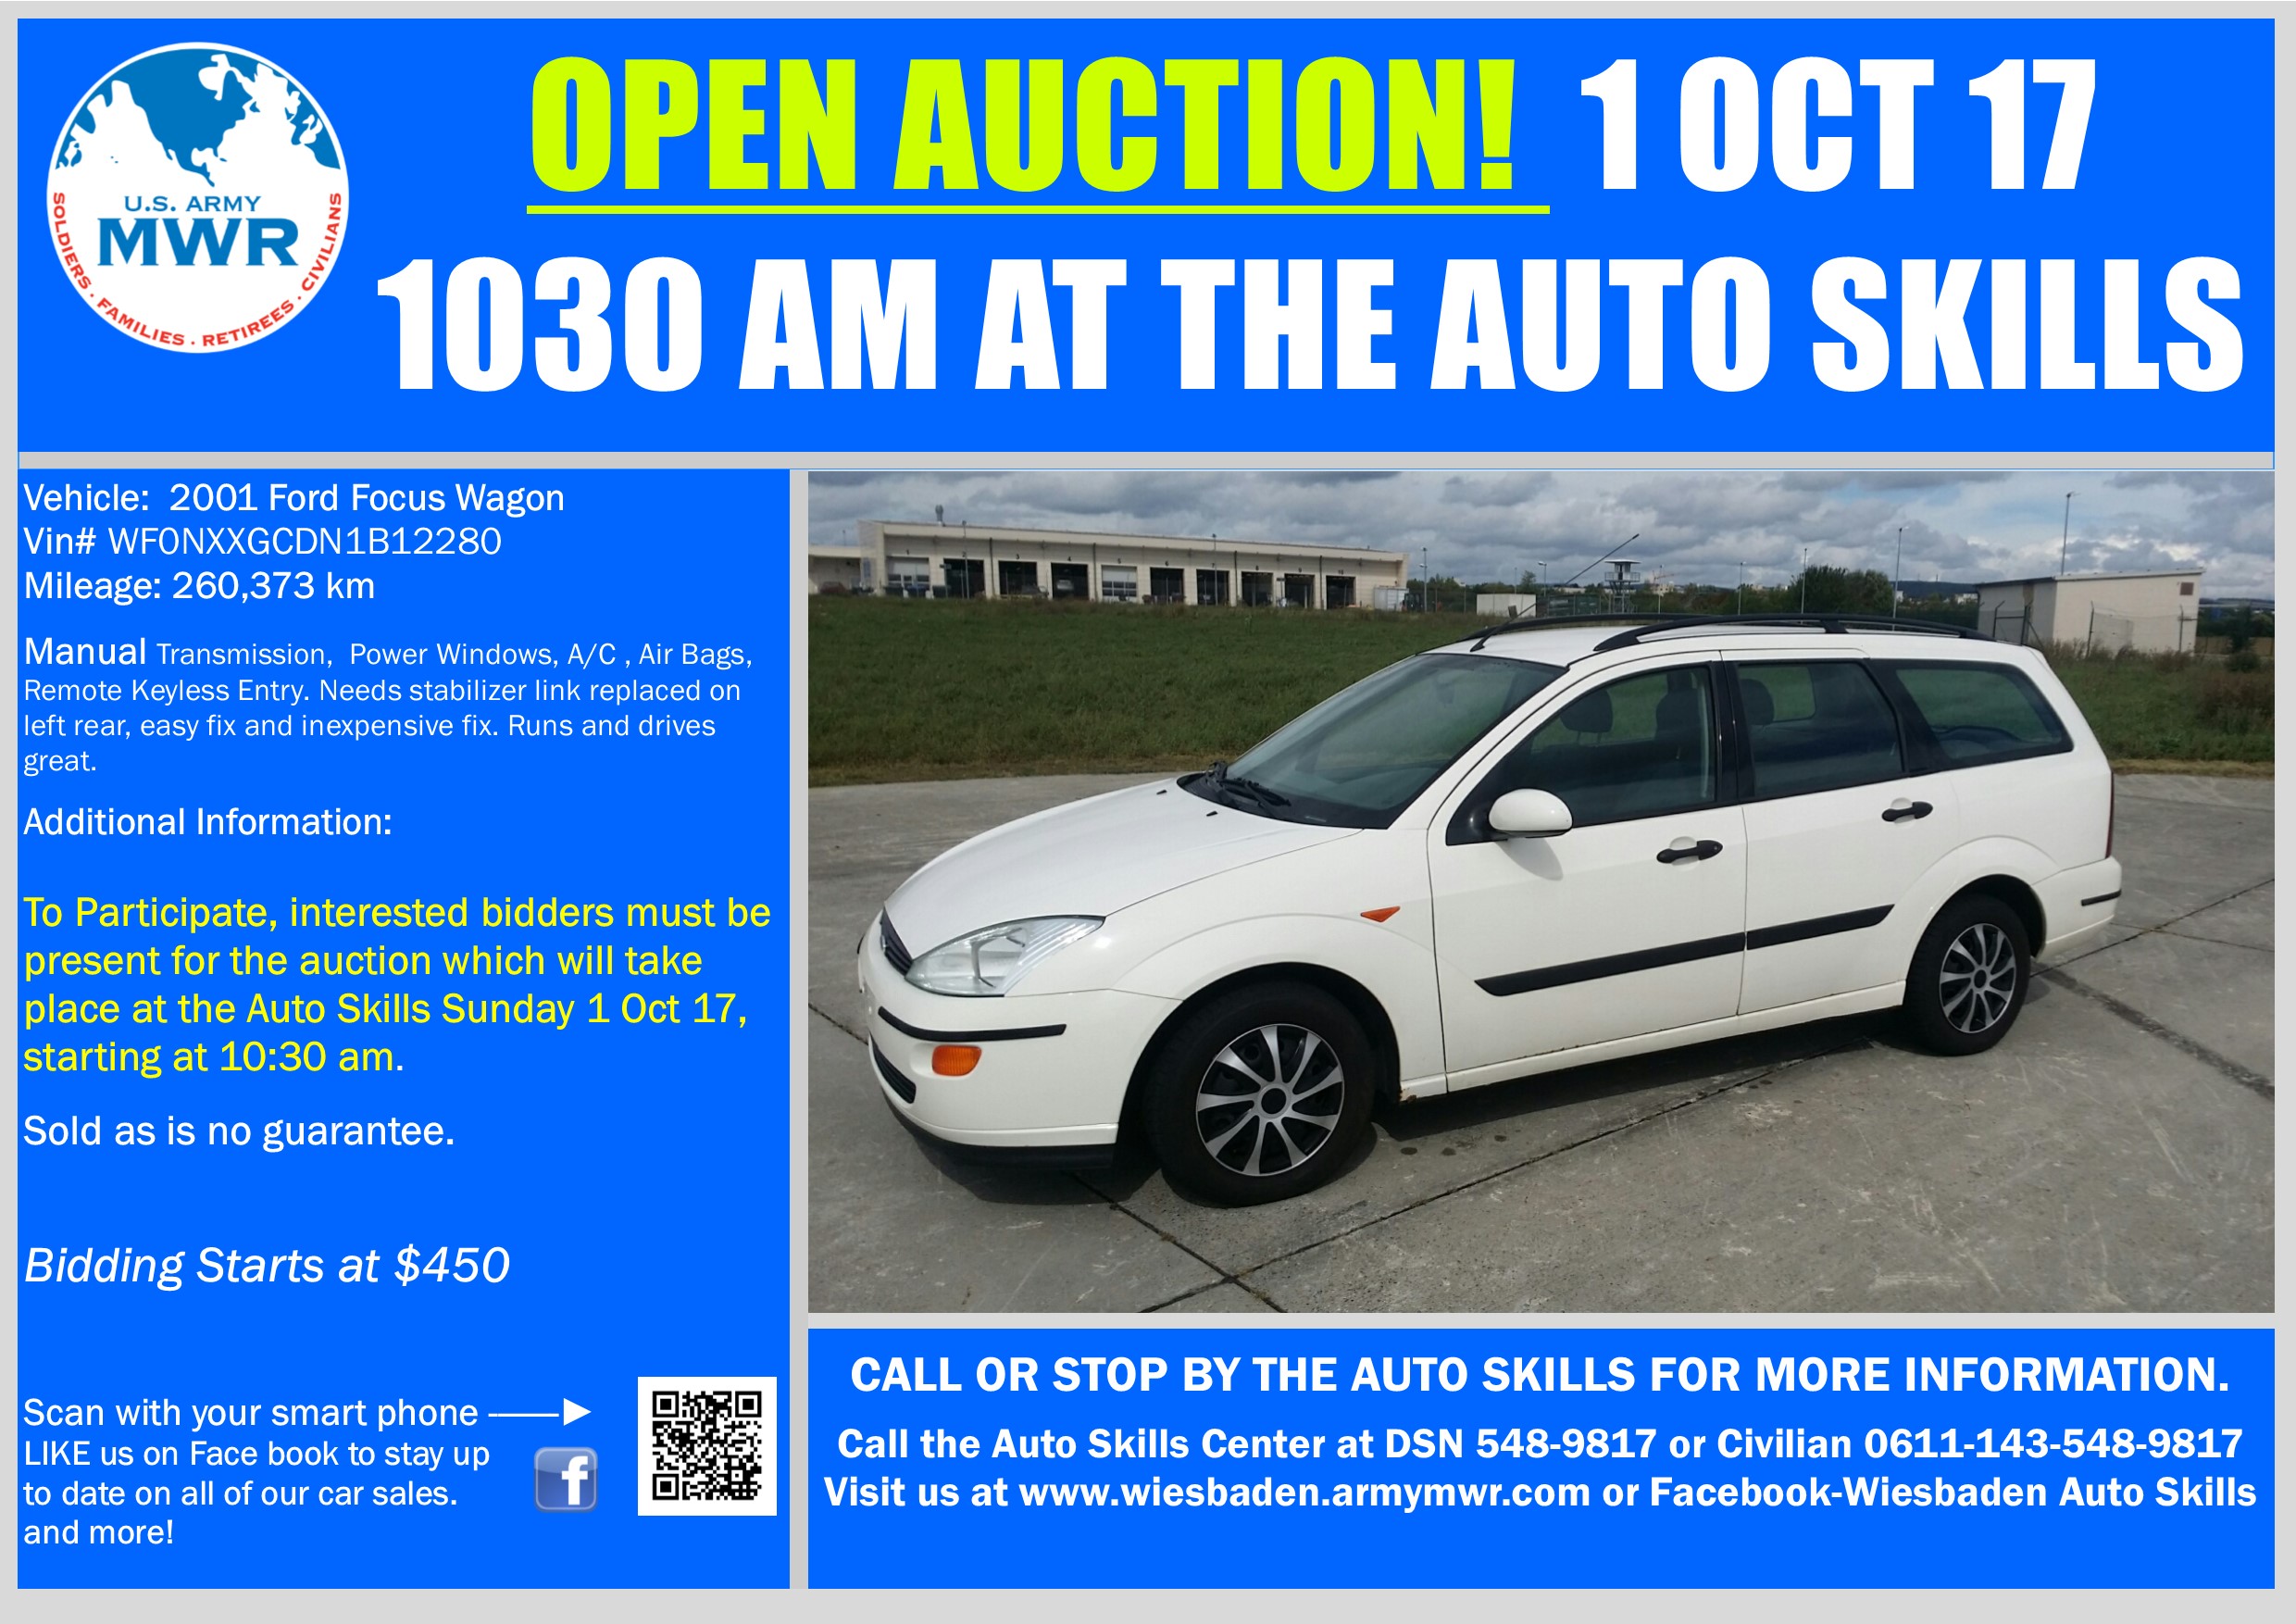 Sale_Ford Focus  1 Oct 17 Open Auction.jpg